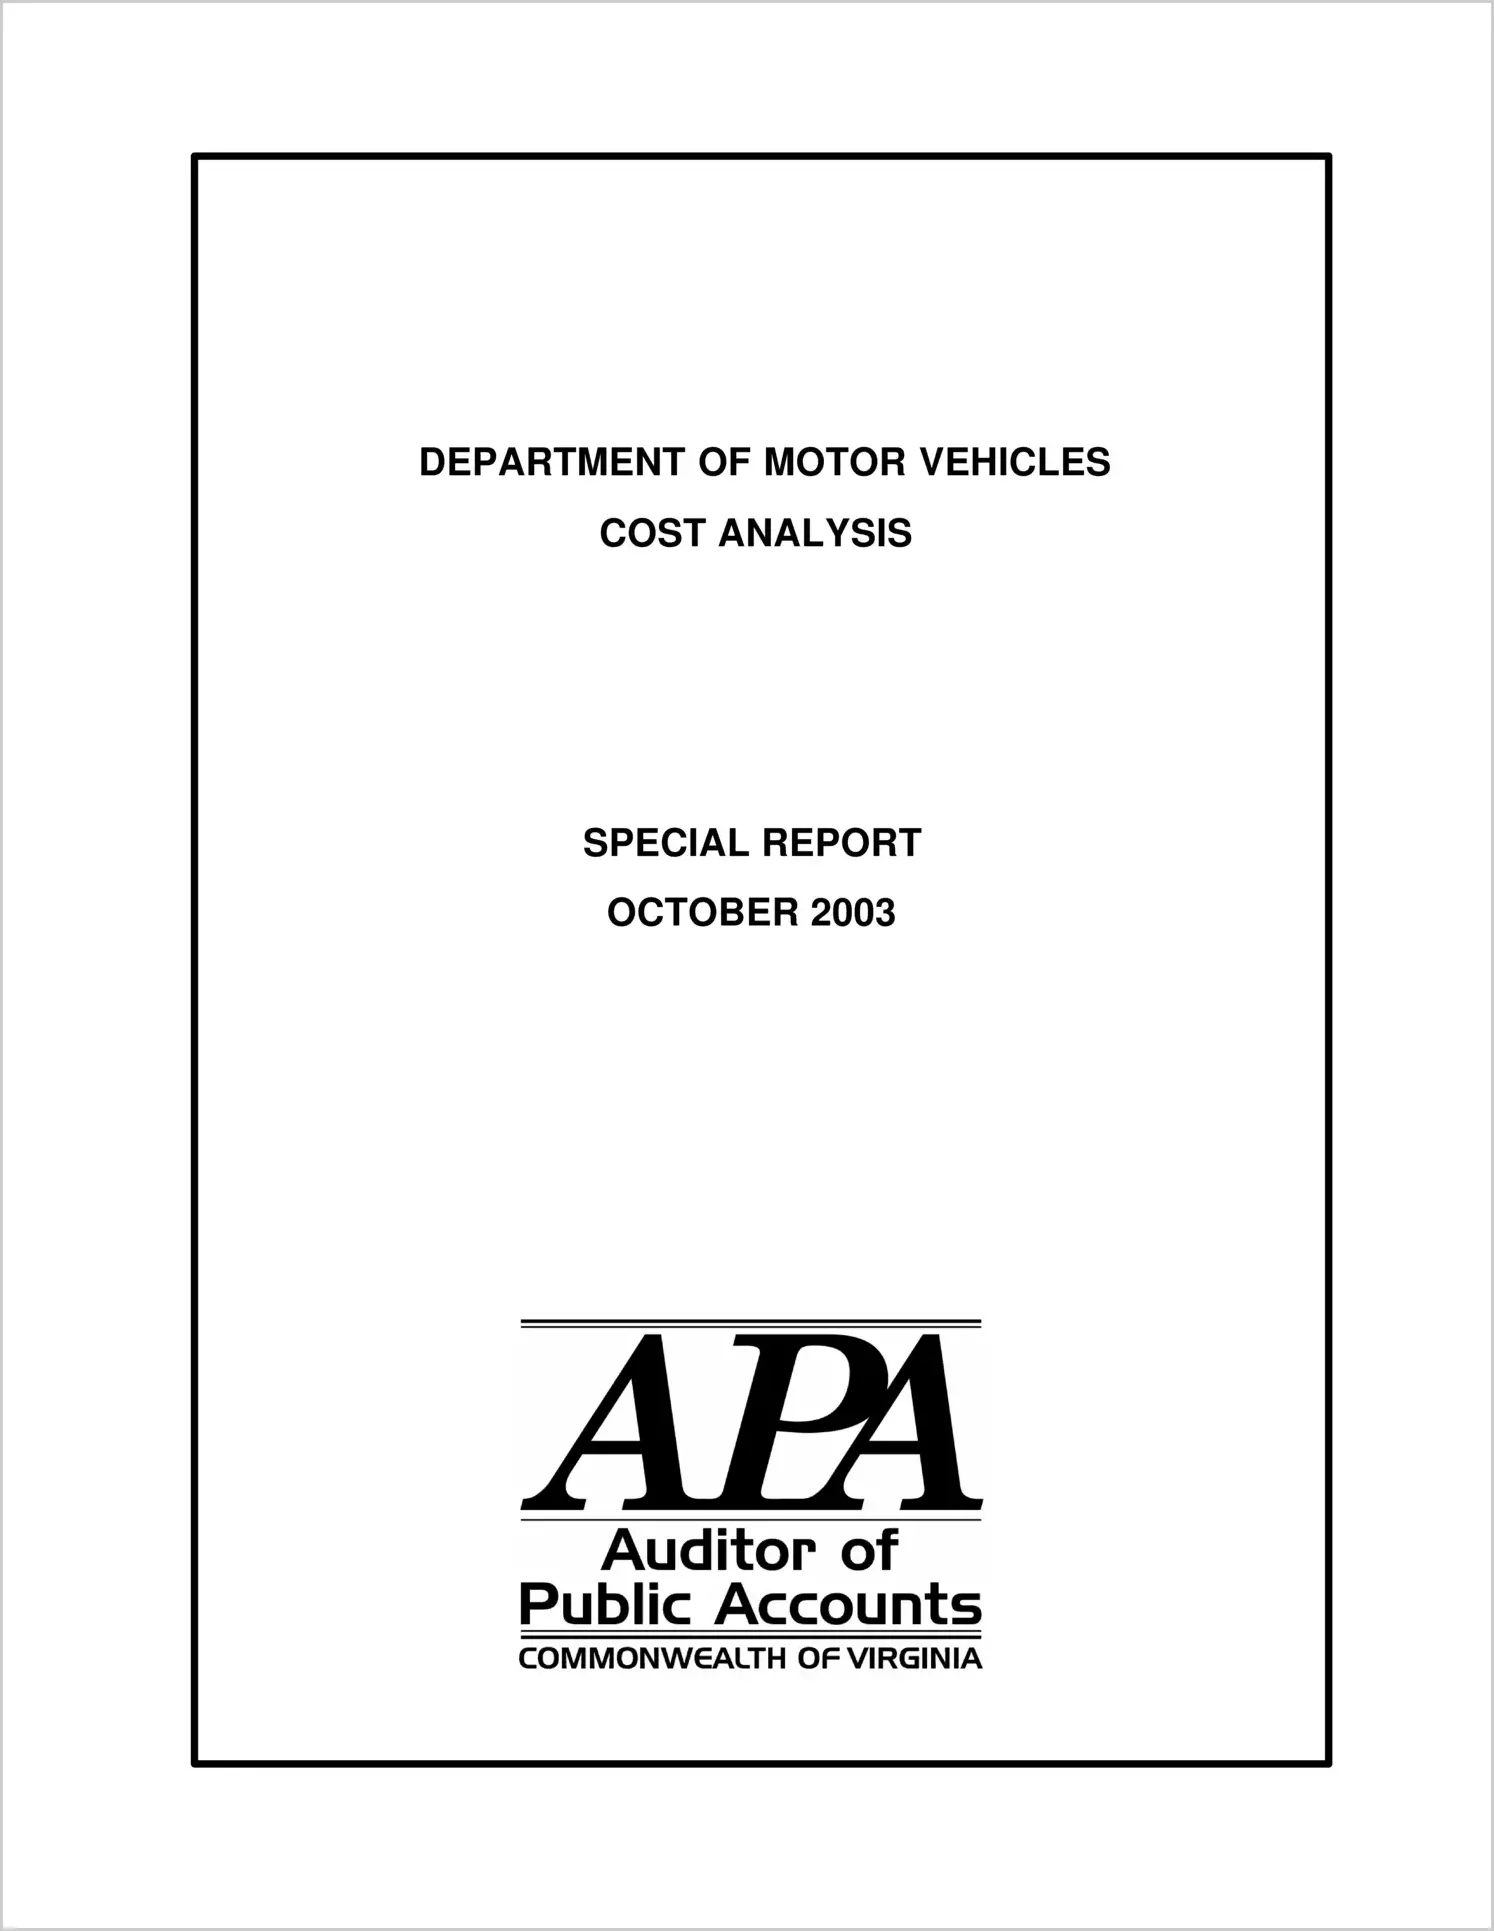 Special ReportDepartment of Motor Vehicles Cost Analysis Special Report(Report Date: November 2003)